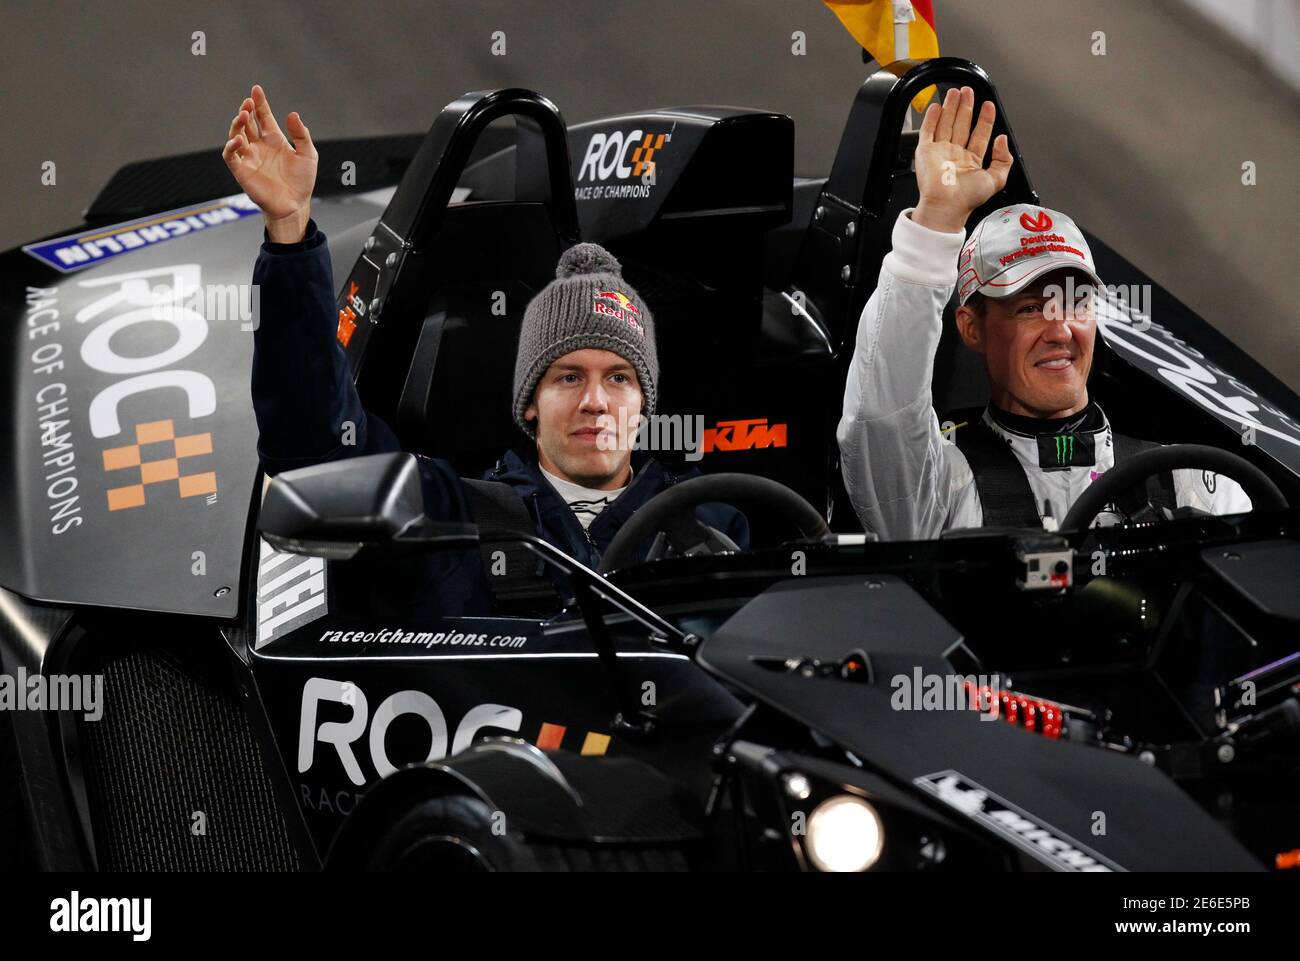 Formula One drivers Michael Schumacher (R) and Sebastian Vettel arrive for  the Race of Champions (ROC) at the Esprit Arena in Duesseldorf December 3,  2011. REUTERS/Alex Domanski (GERMANY - Tags: SPORT MOTORSPORT